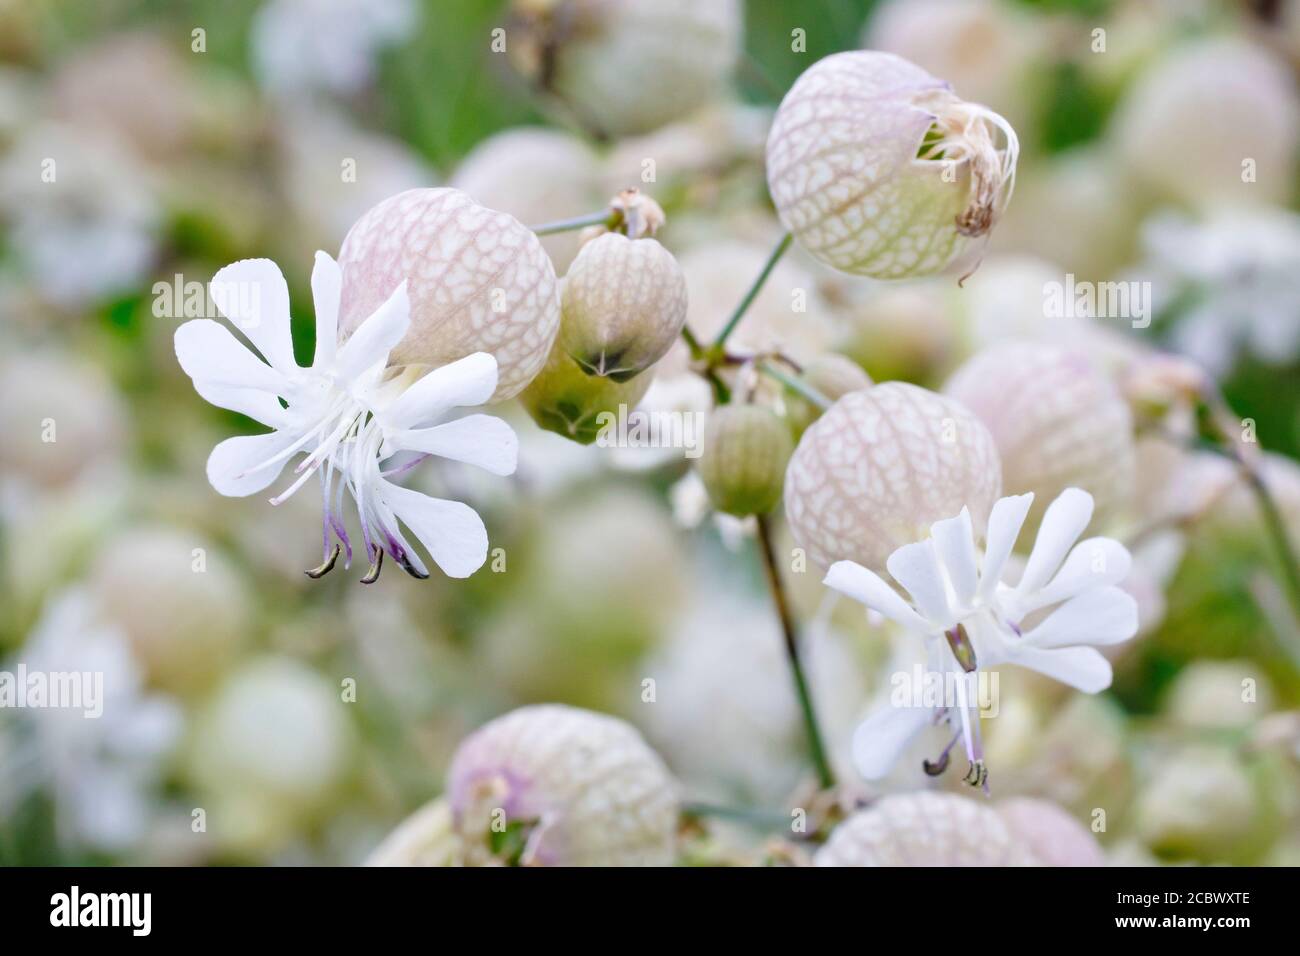 Bladder Campion (silene vulgaris), close up showing the white flowers and the large swollen bladder-like sepal tube or calyx. Stock Photo